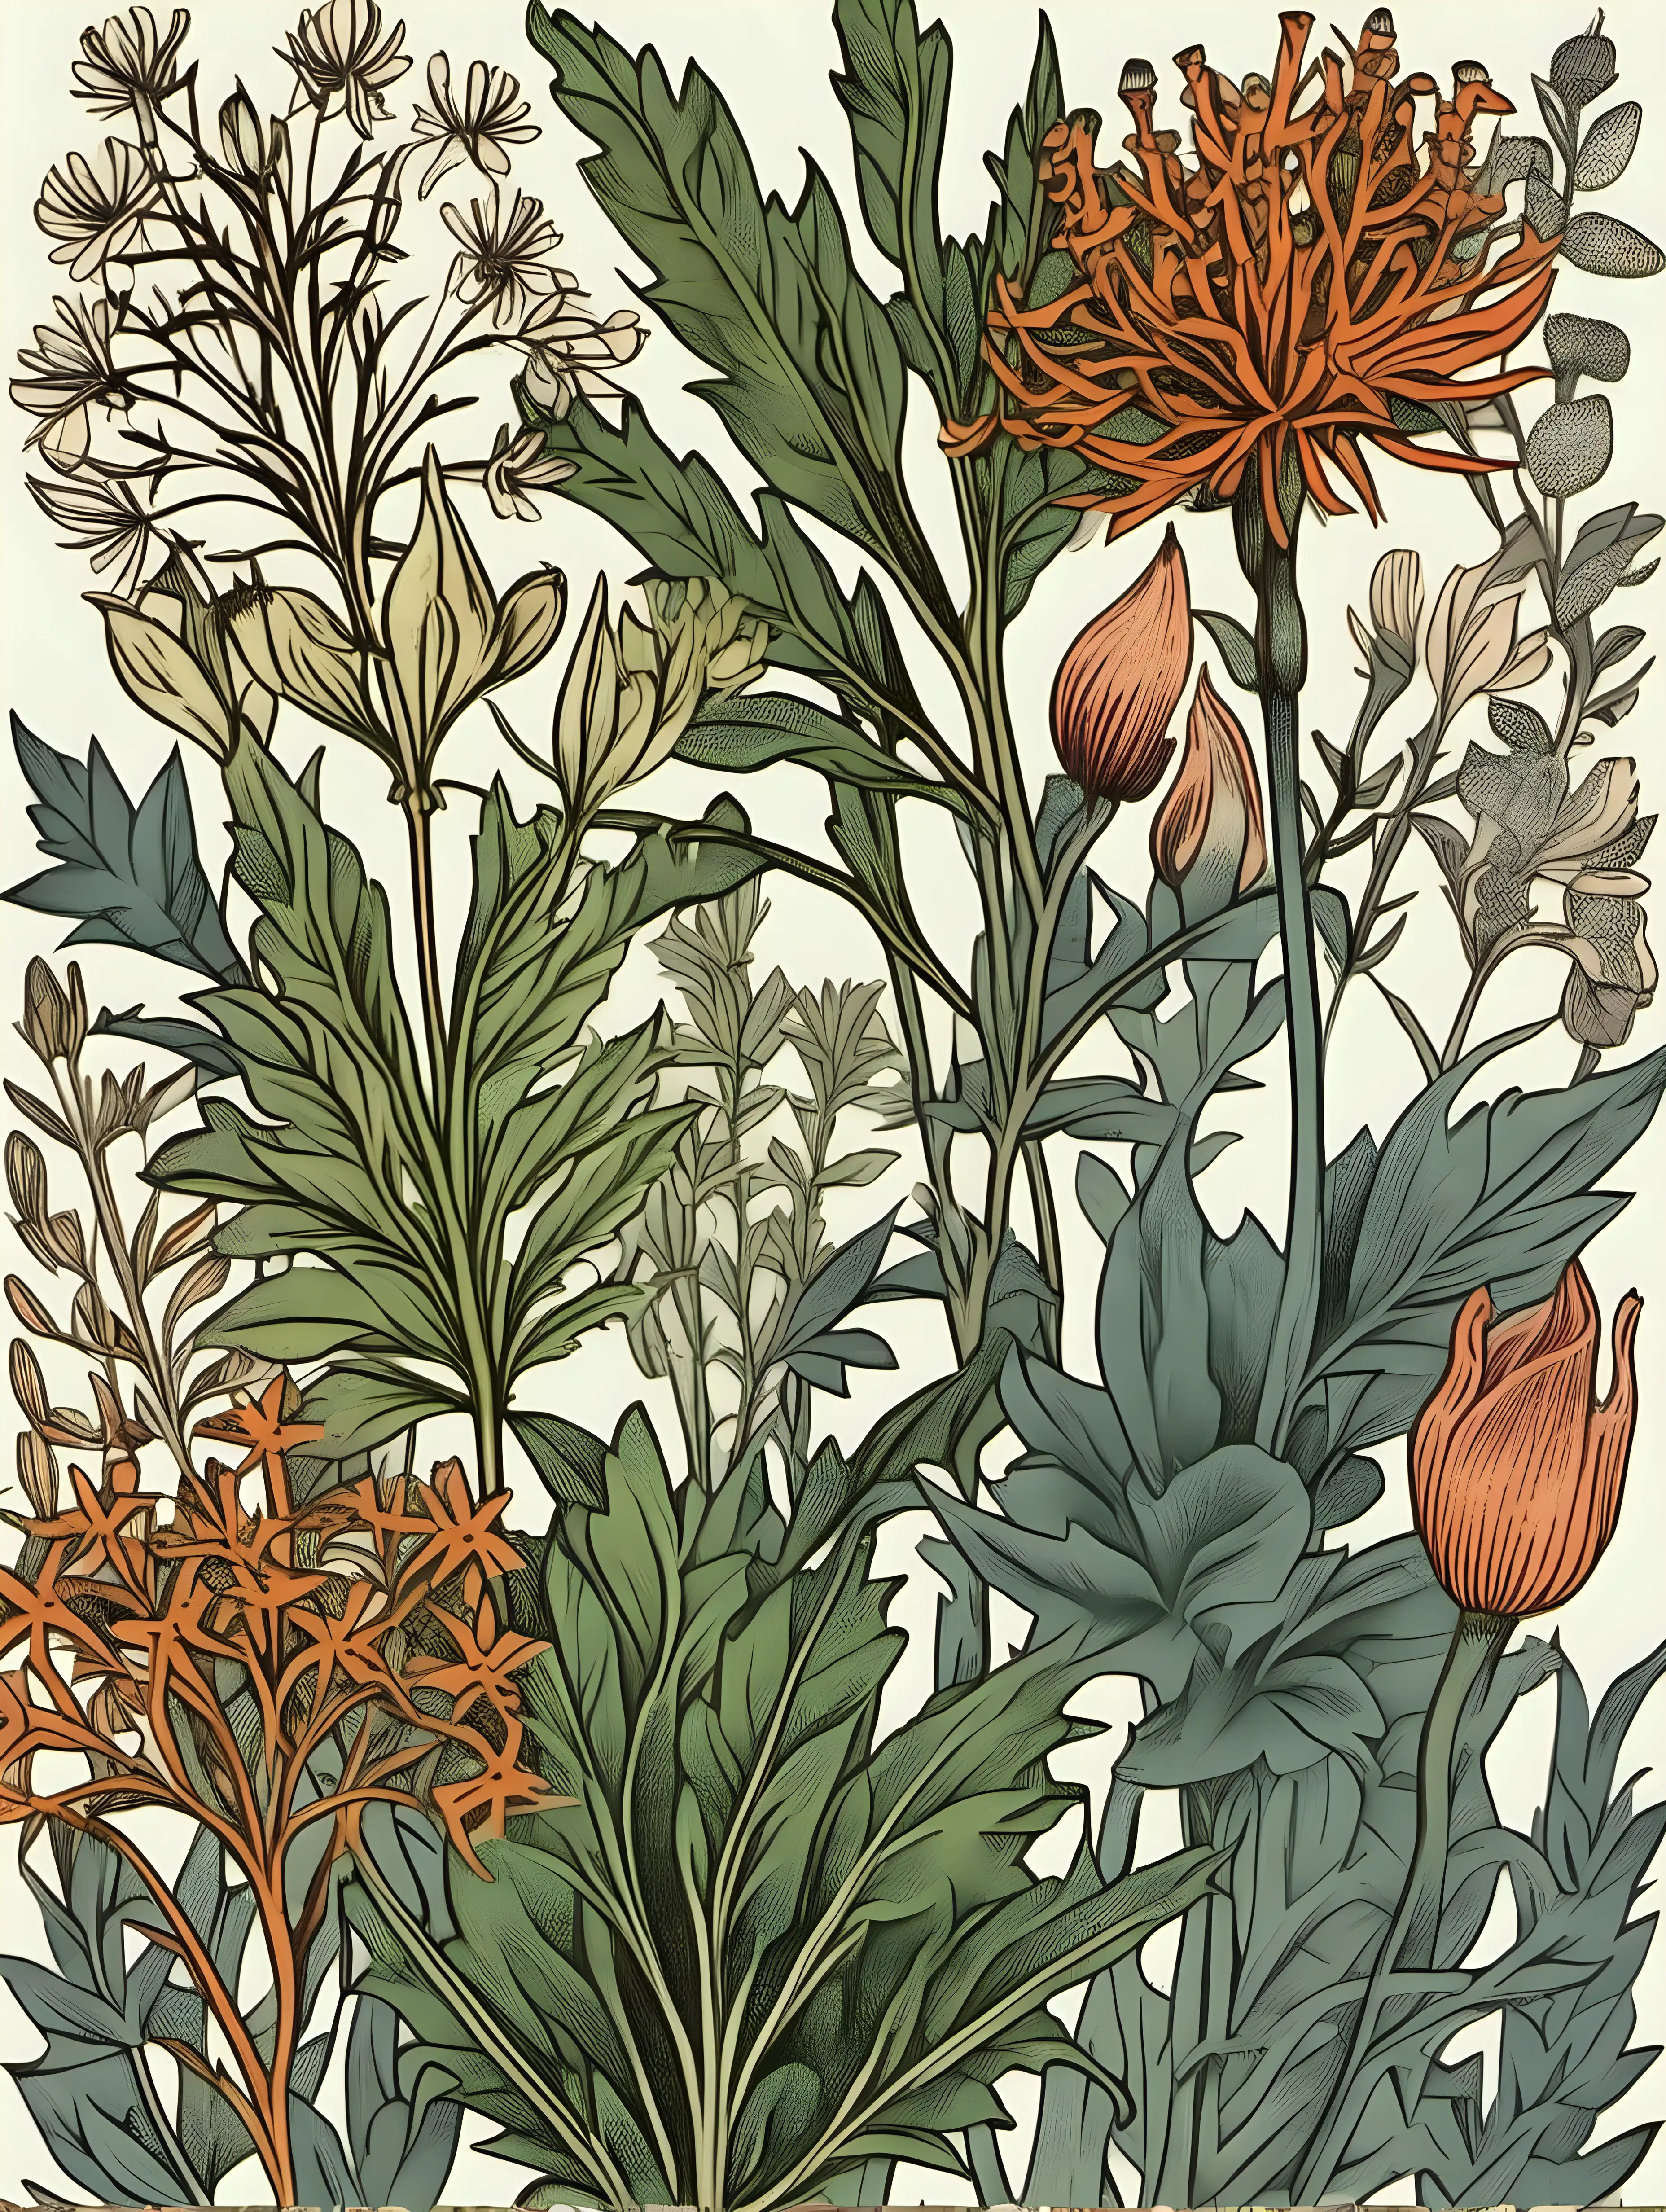 botanical illustration in vintage style, herbs, plants postcard in william morris style
